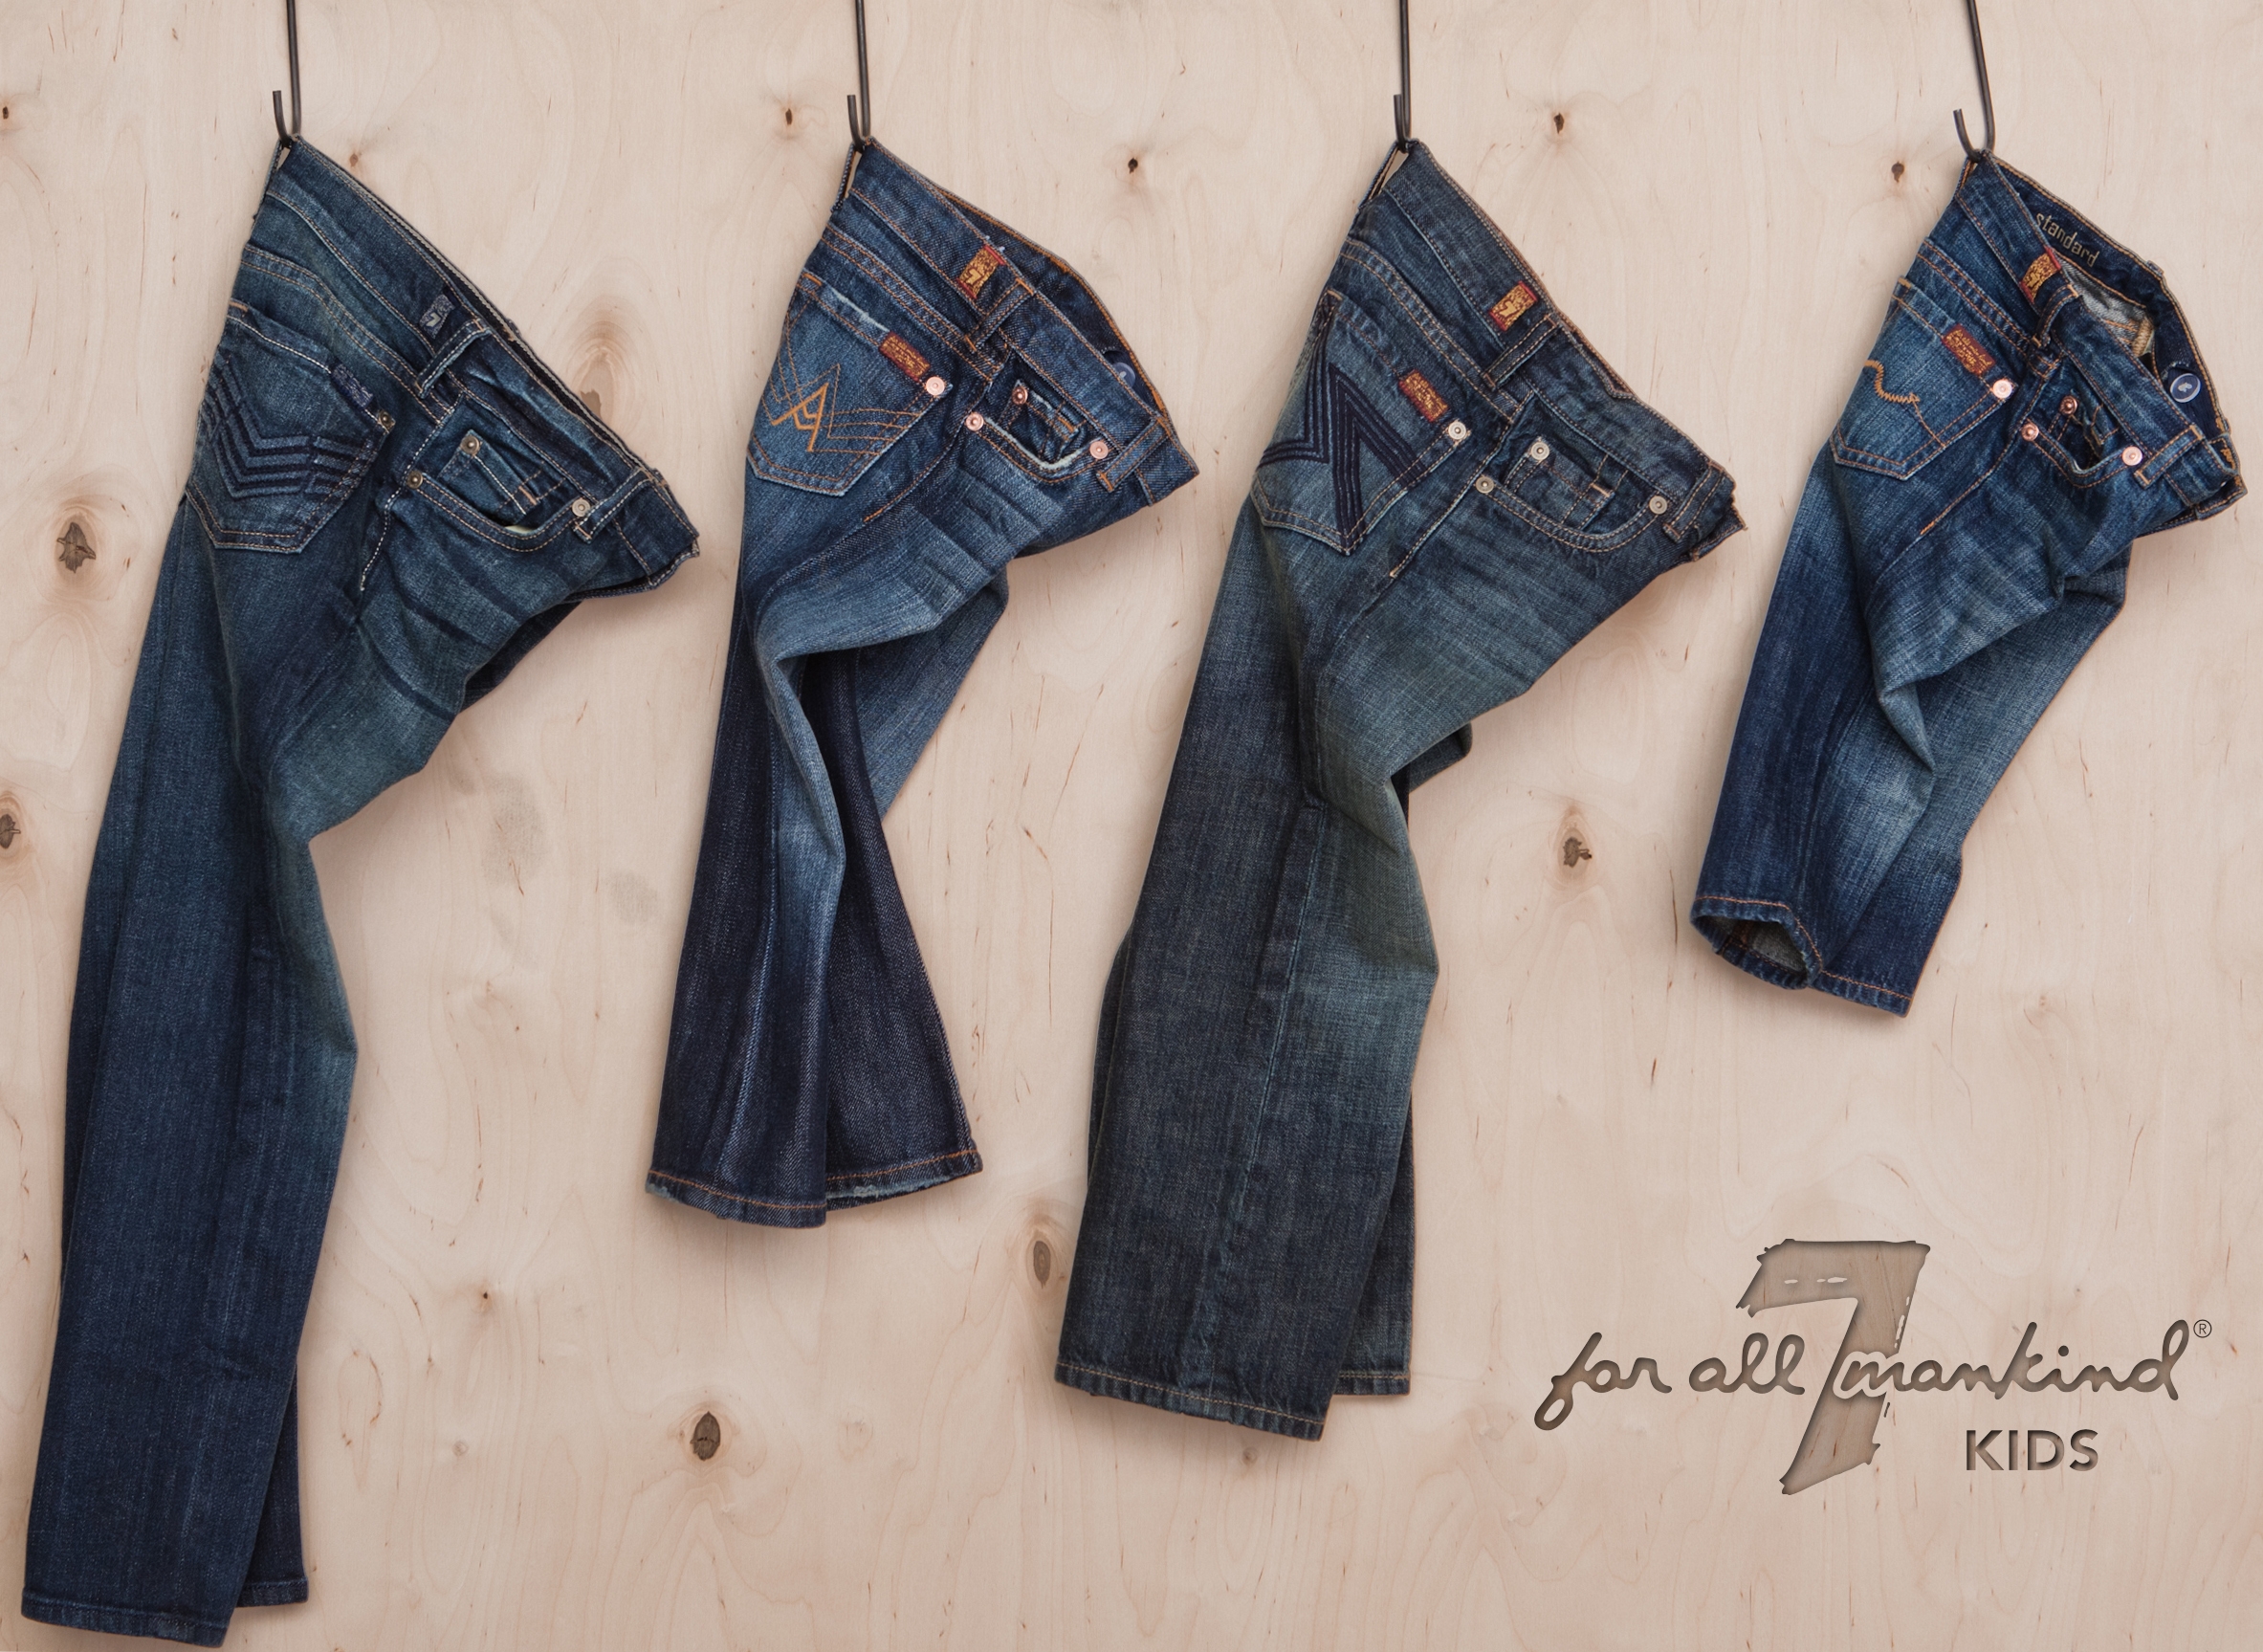 7 for all mankind jean brands